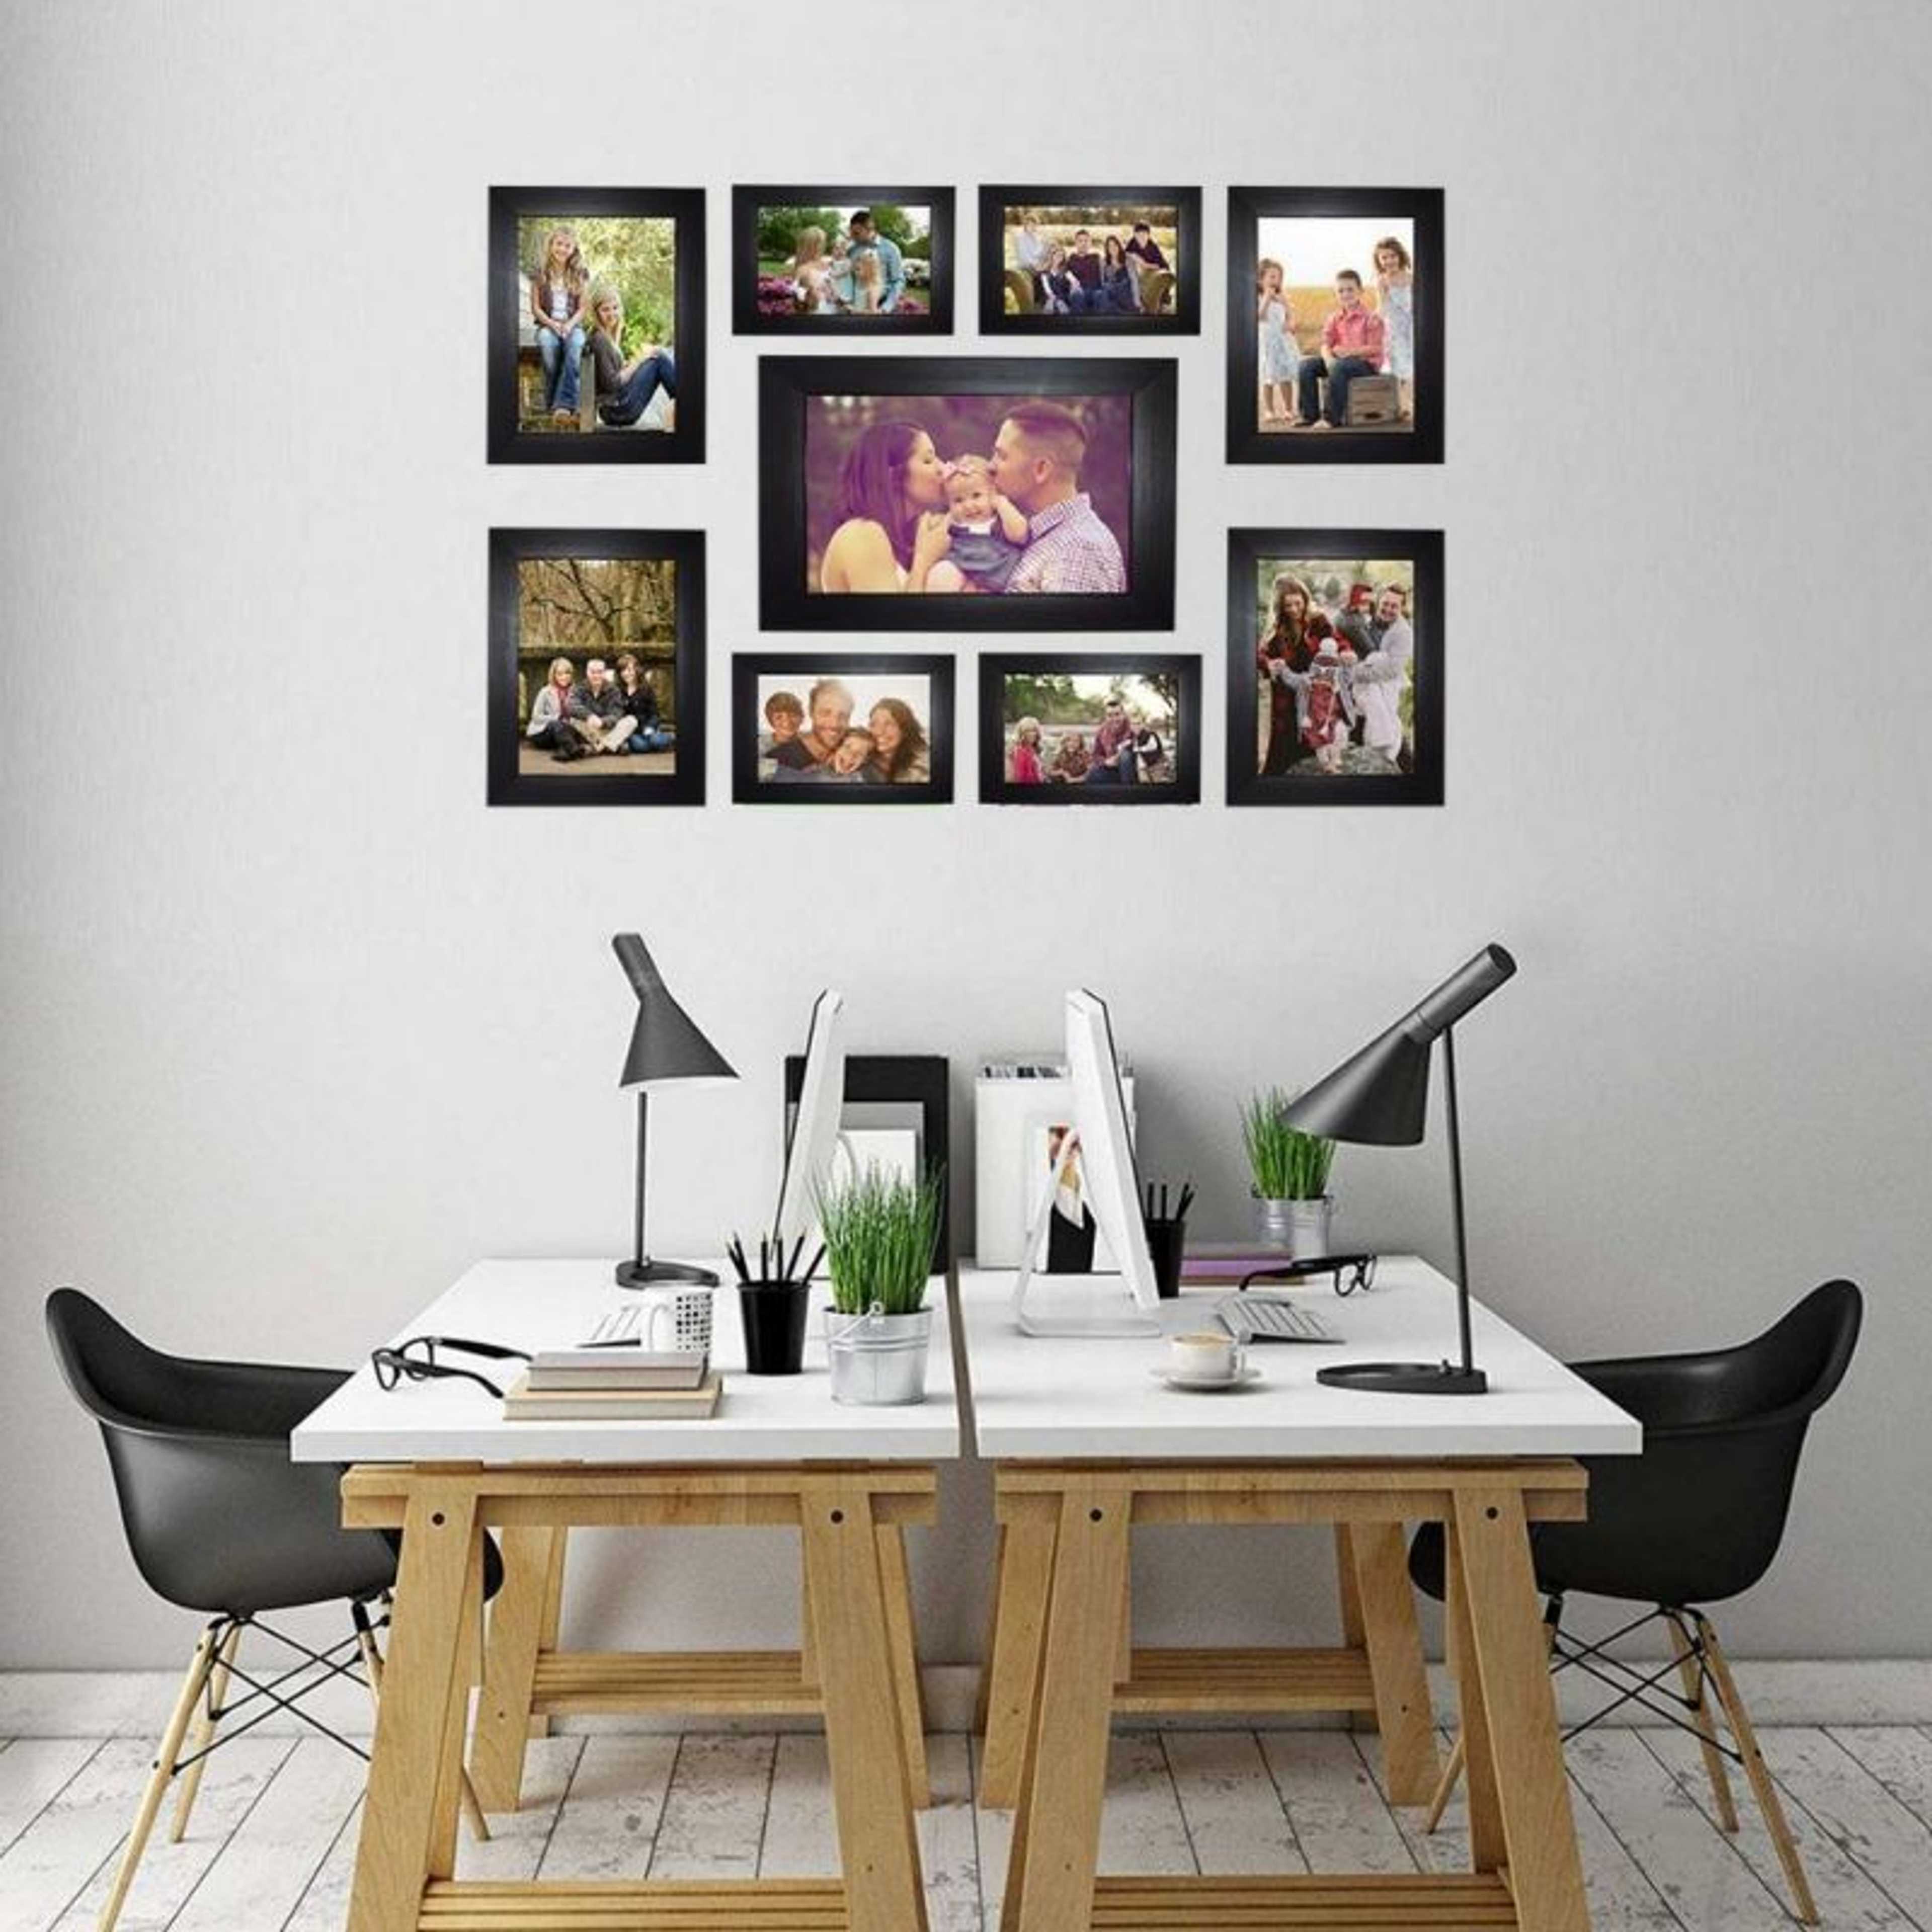 Set of 9 - Photo Frames Collage Wall Hanging Wall Decor Set - Black